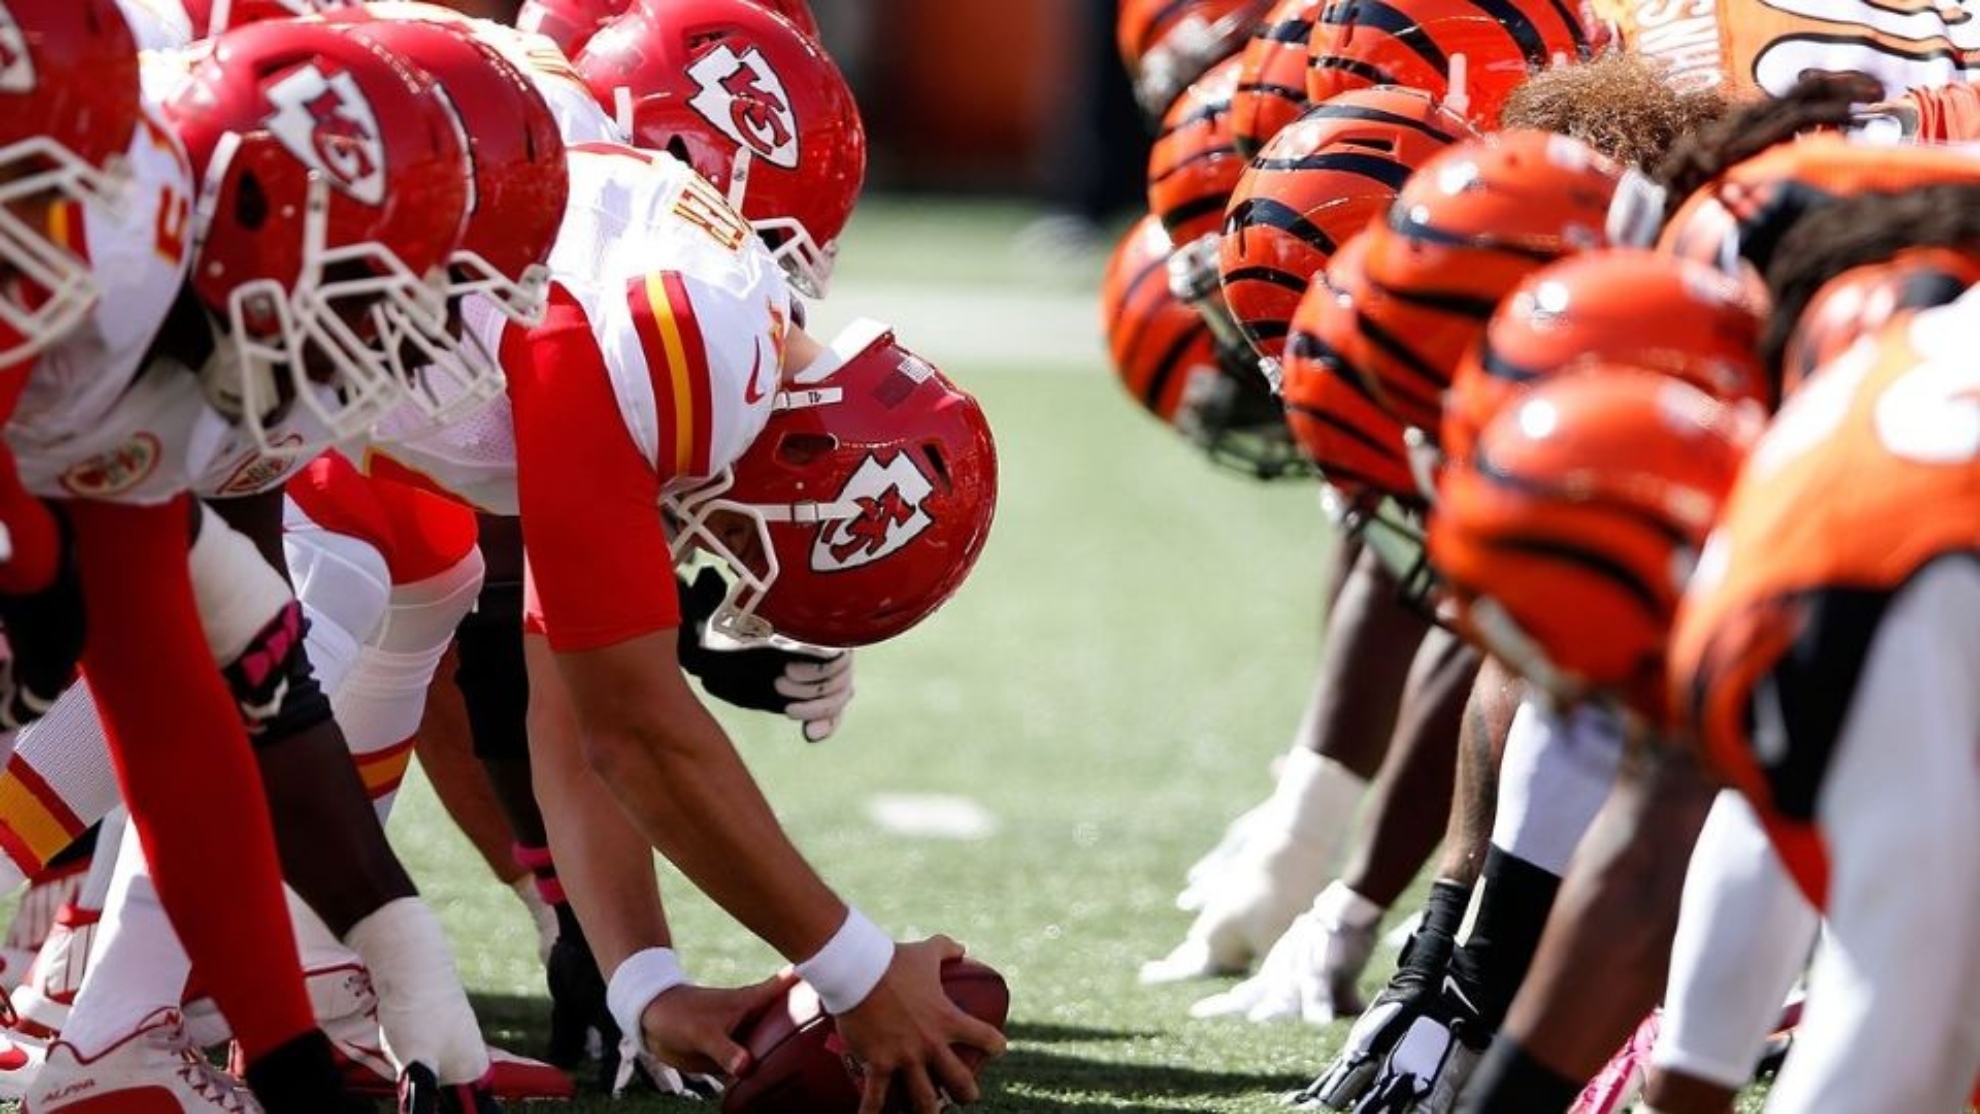 when is the chiefs bengals game